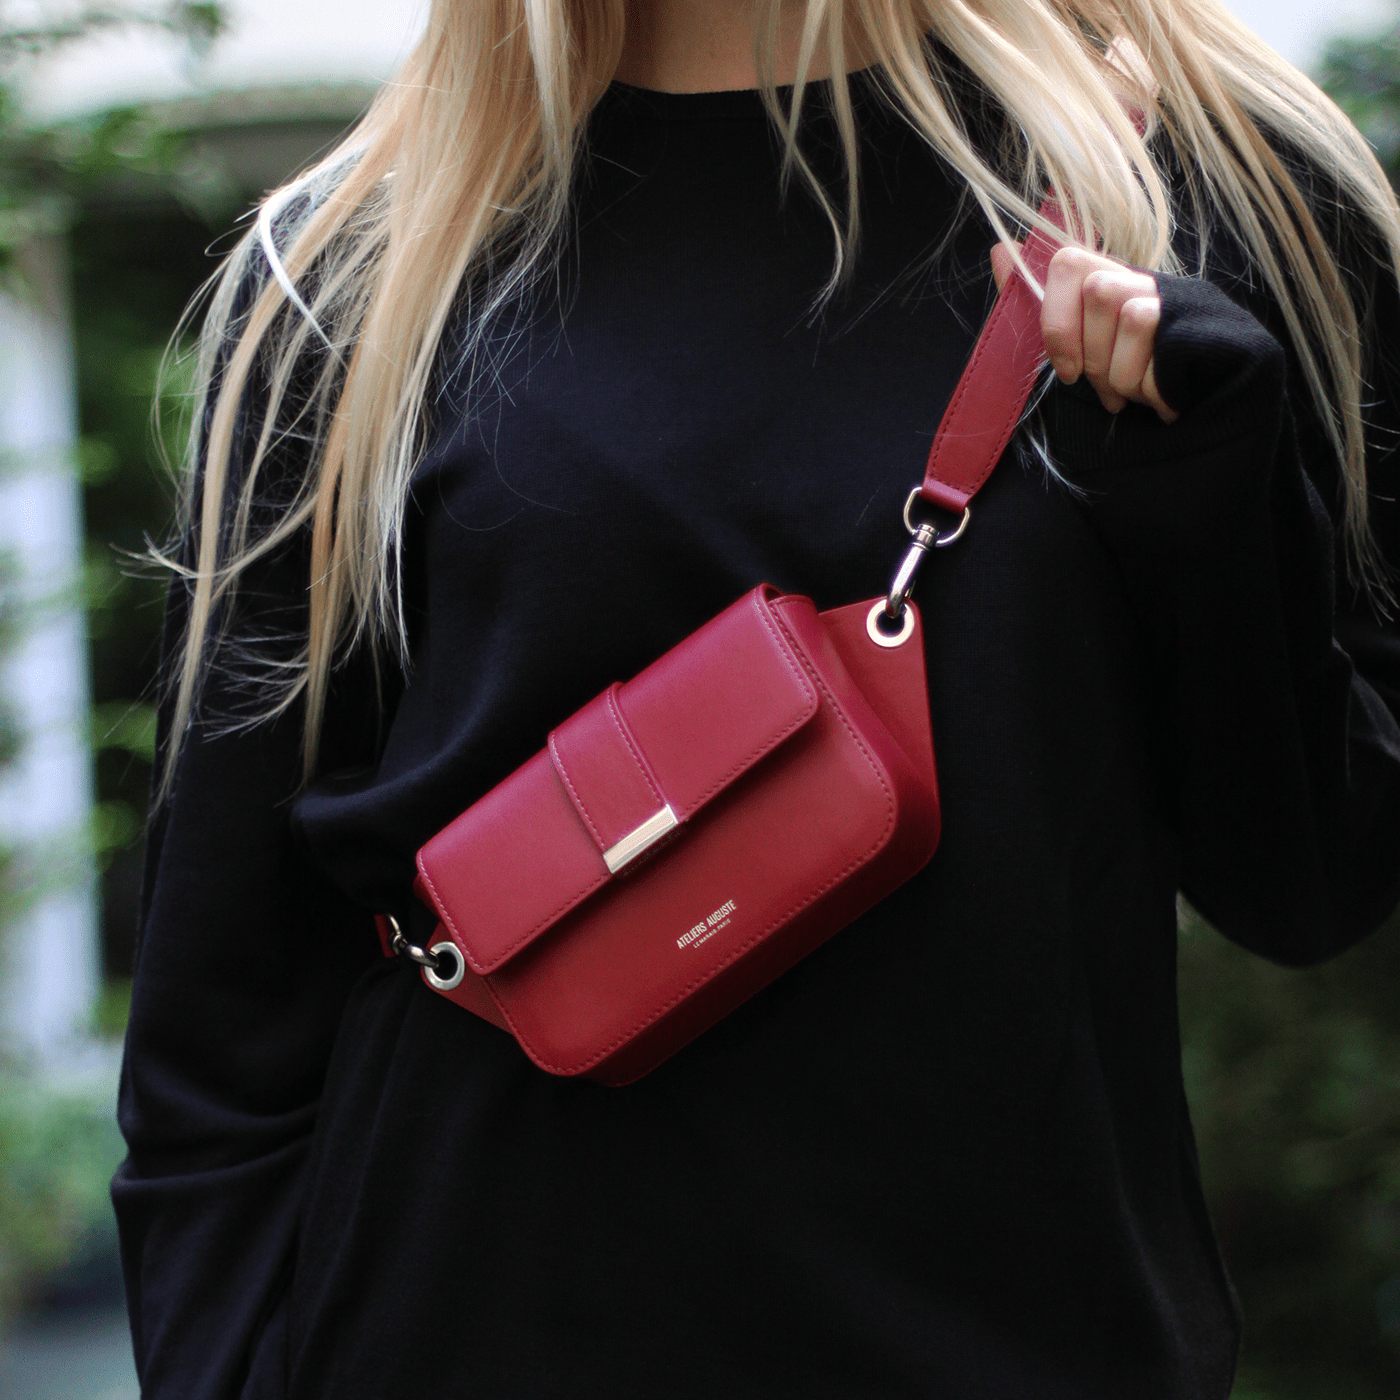 Les Ateliers Auguste on X: Our Roquette belt bag is the perfect